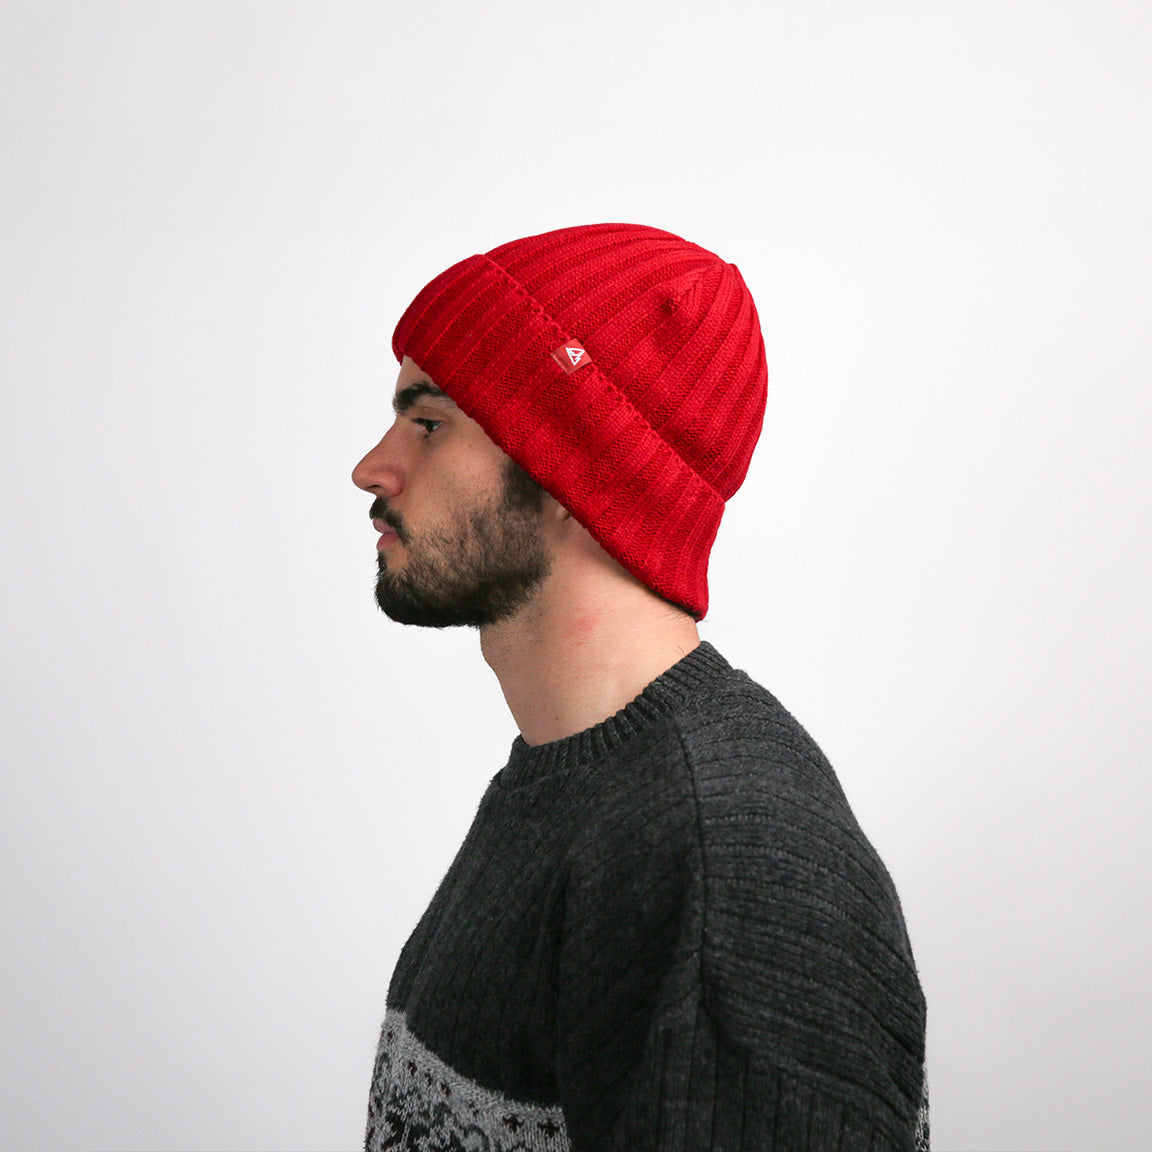 Displayed in a side profile, the same red beanie shows the ribbed texture and the fold at the brim with the white logo. It covers the ears and conforms to the head's shape, with the material gathering at the top for a casual, slouchy appearance. The texture of the charcoal grey sweater is also visible from this angle.